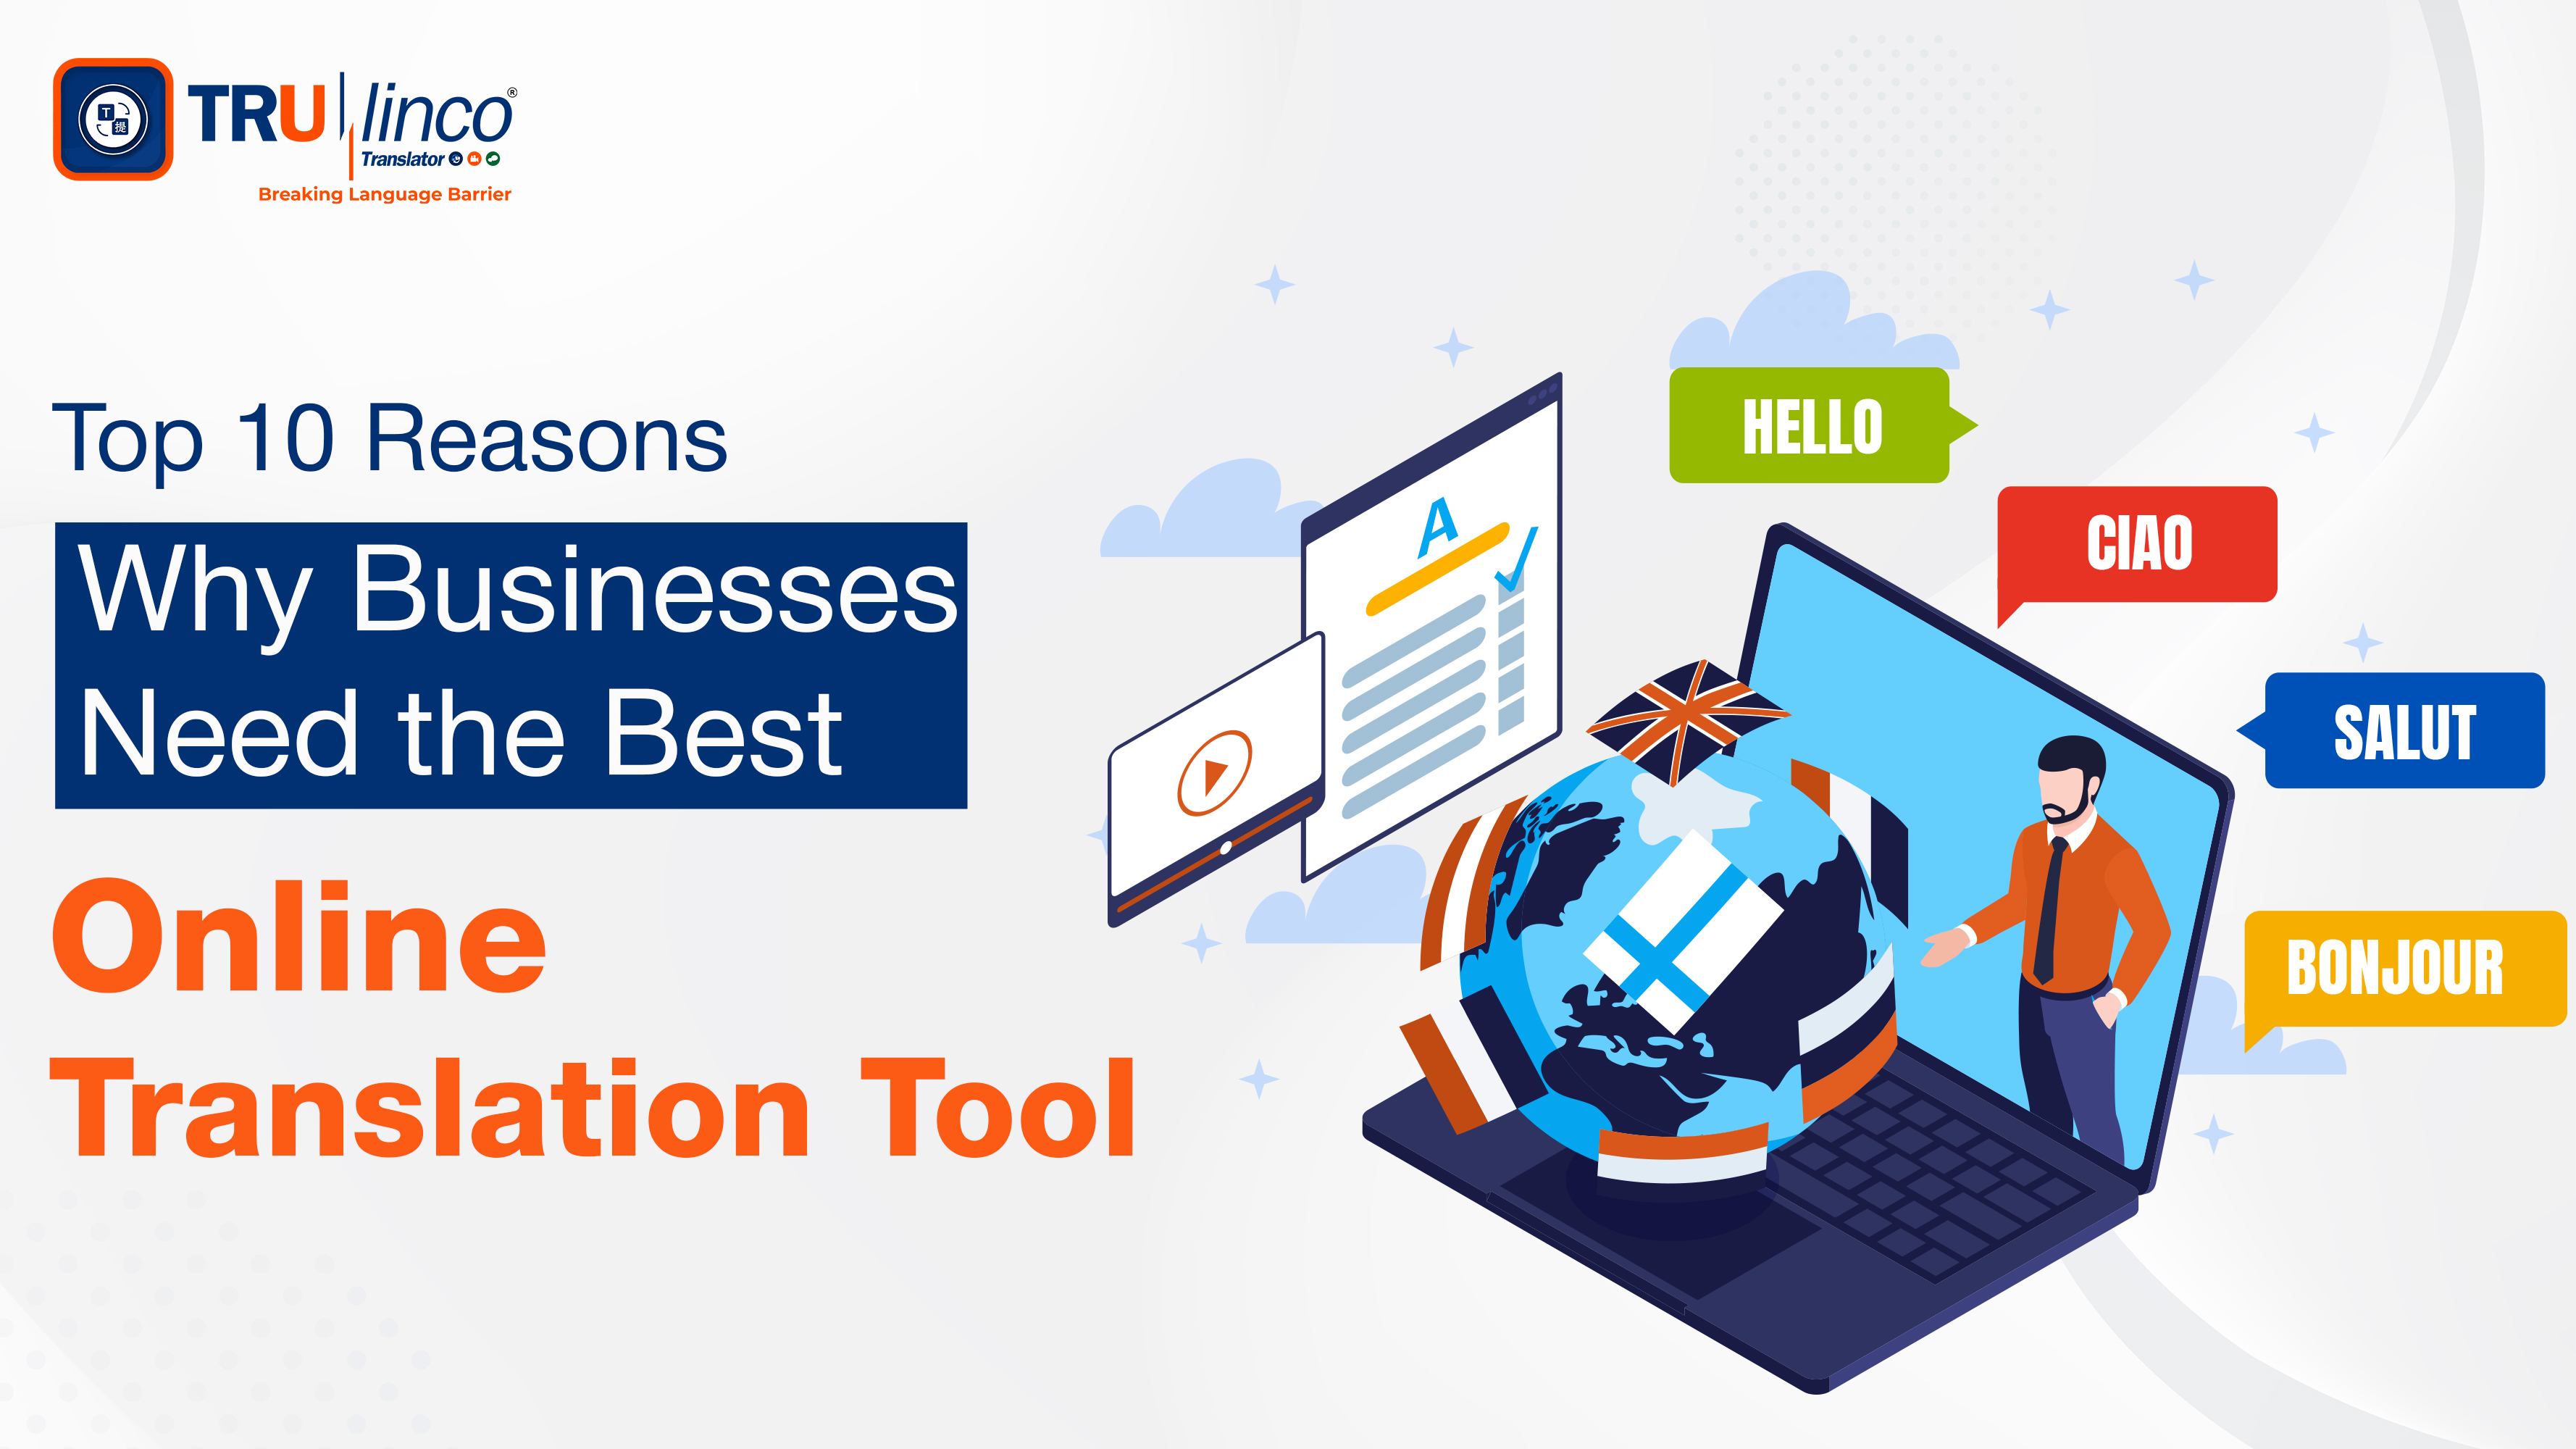 Top 10 Reasons Why Businesses Need the Best Online Translation Tool